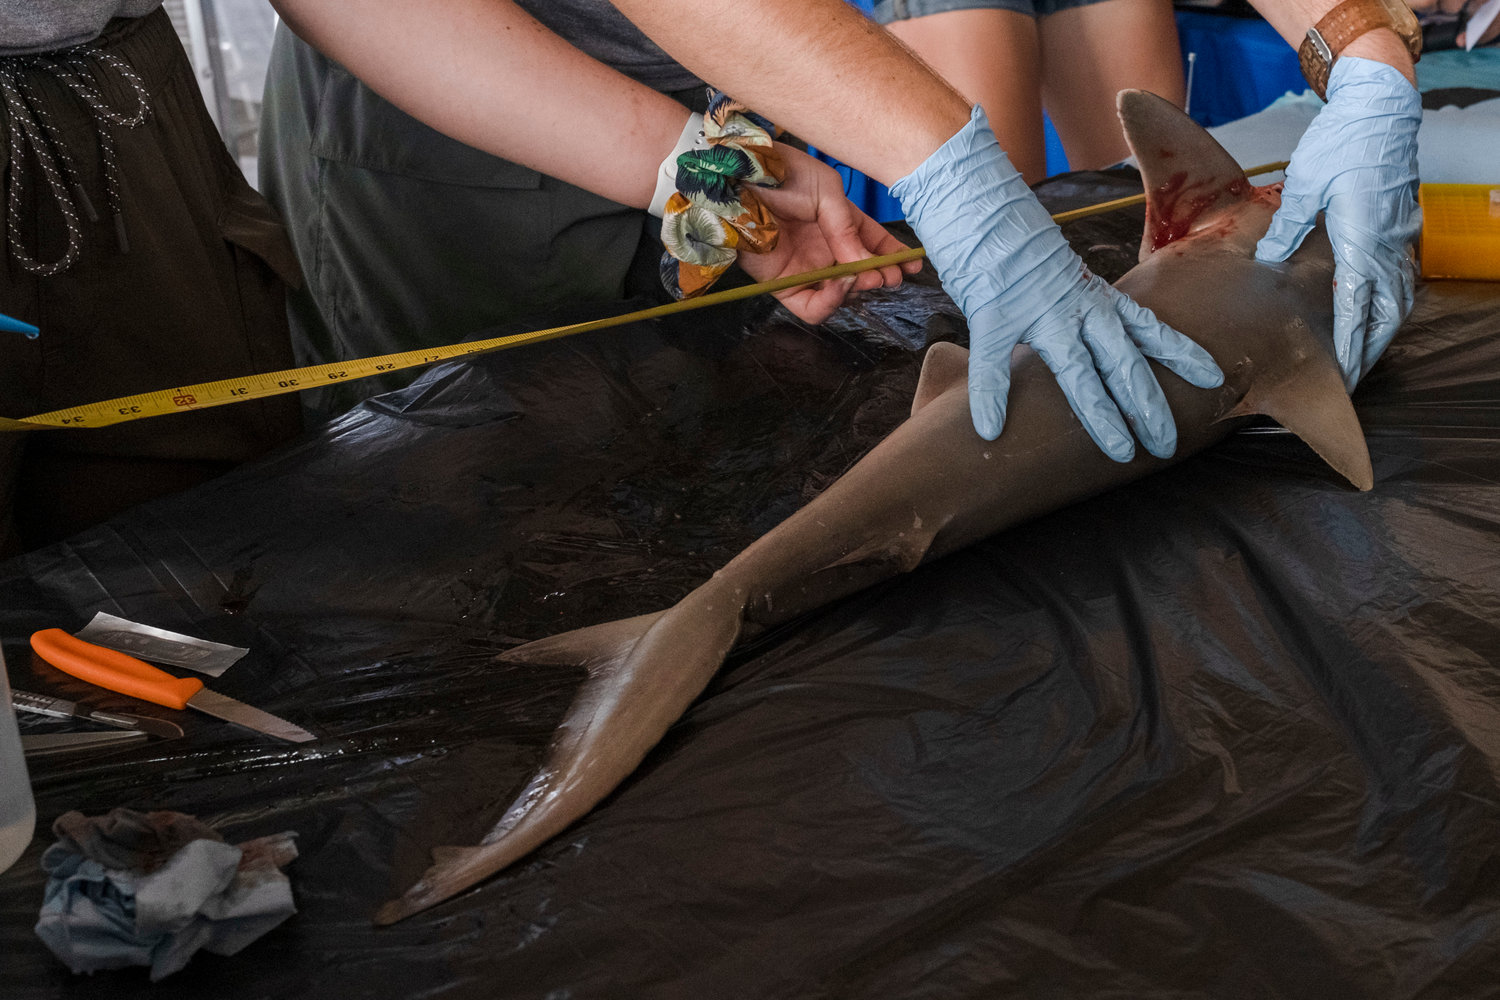 Alena Anderson and Danielle McAree, researchers with the Mississippi State University Marine Fisheries Ecology, measure a blacknose shark prior to dissecting it for a crowd at Gulf State Park Pier as a part of Shark Week. The blacknose shark is one of the most common sharks found on the Alabama Gulf Coast and can reach sizes up to five feet.